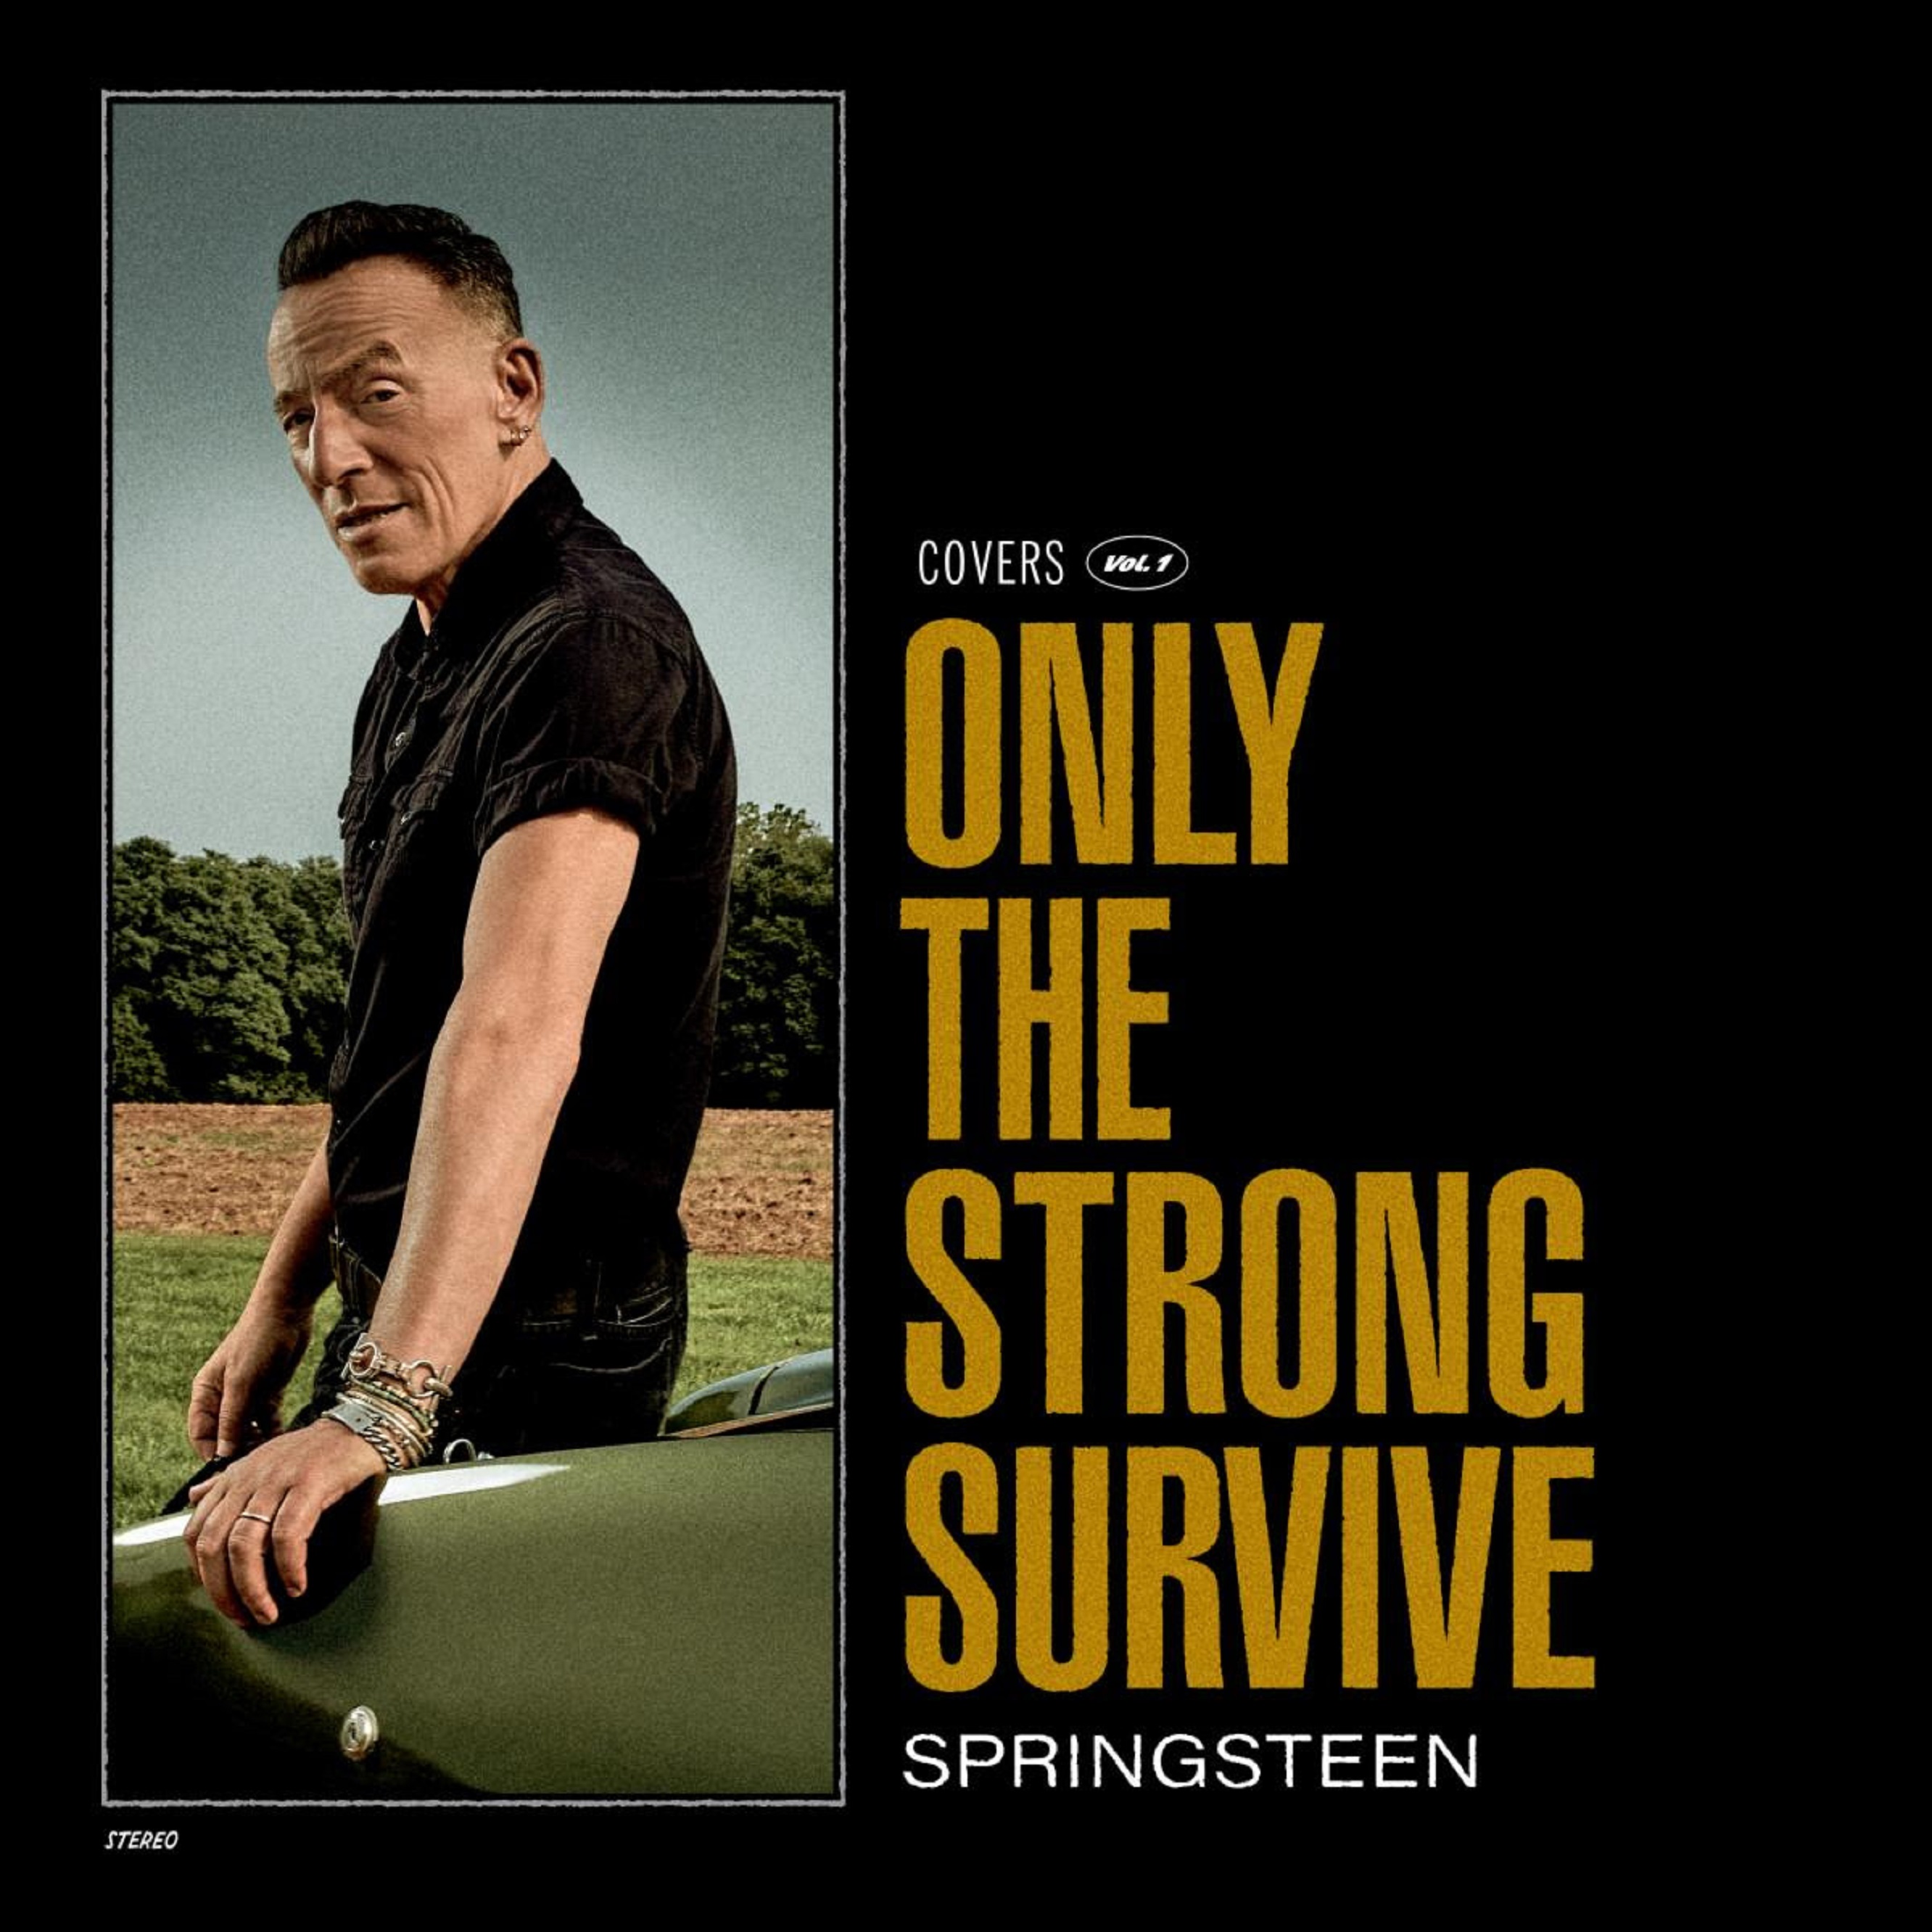 Bruce Springsteen Celebrates 'Only The Strong Survive' With 3 Holiday Week TV Appearances